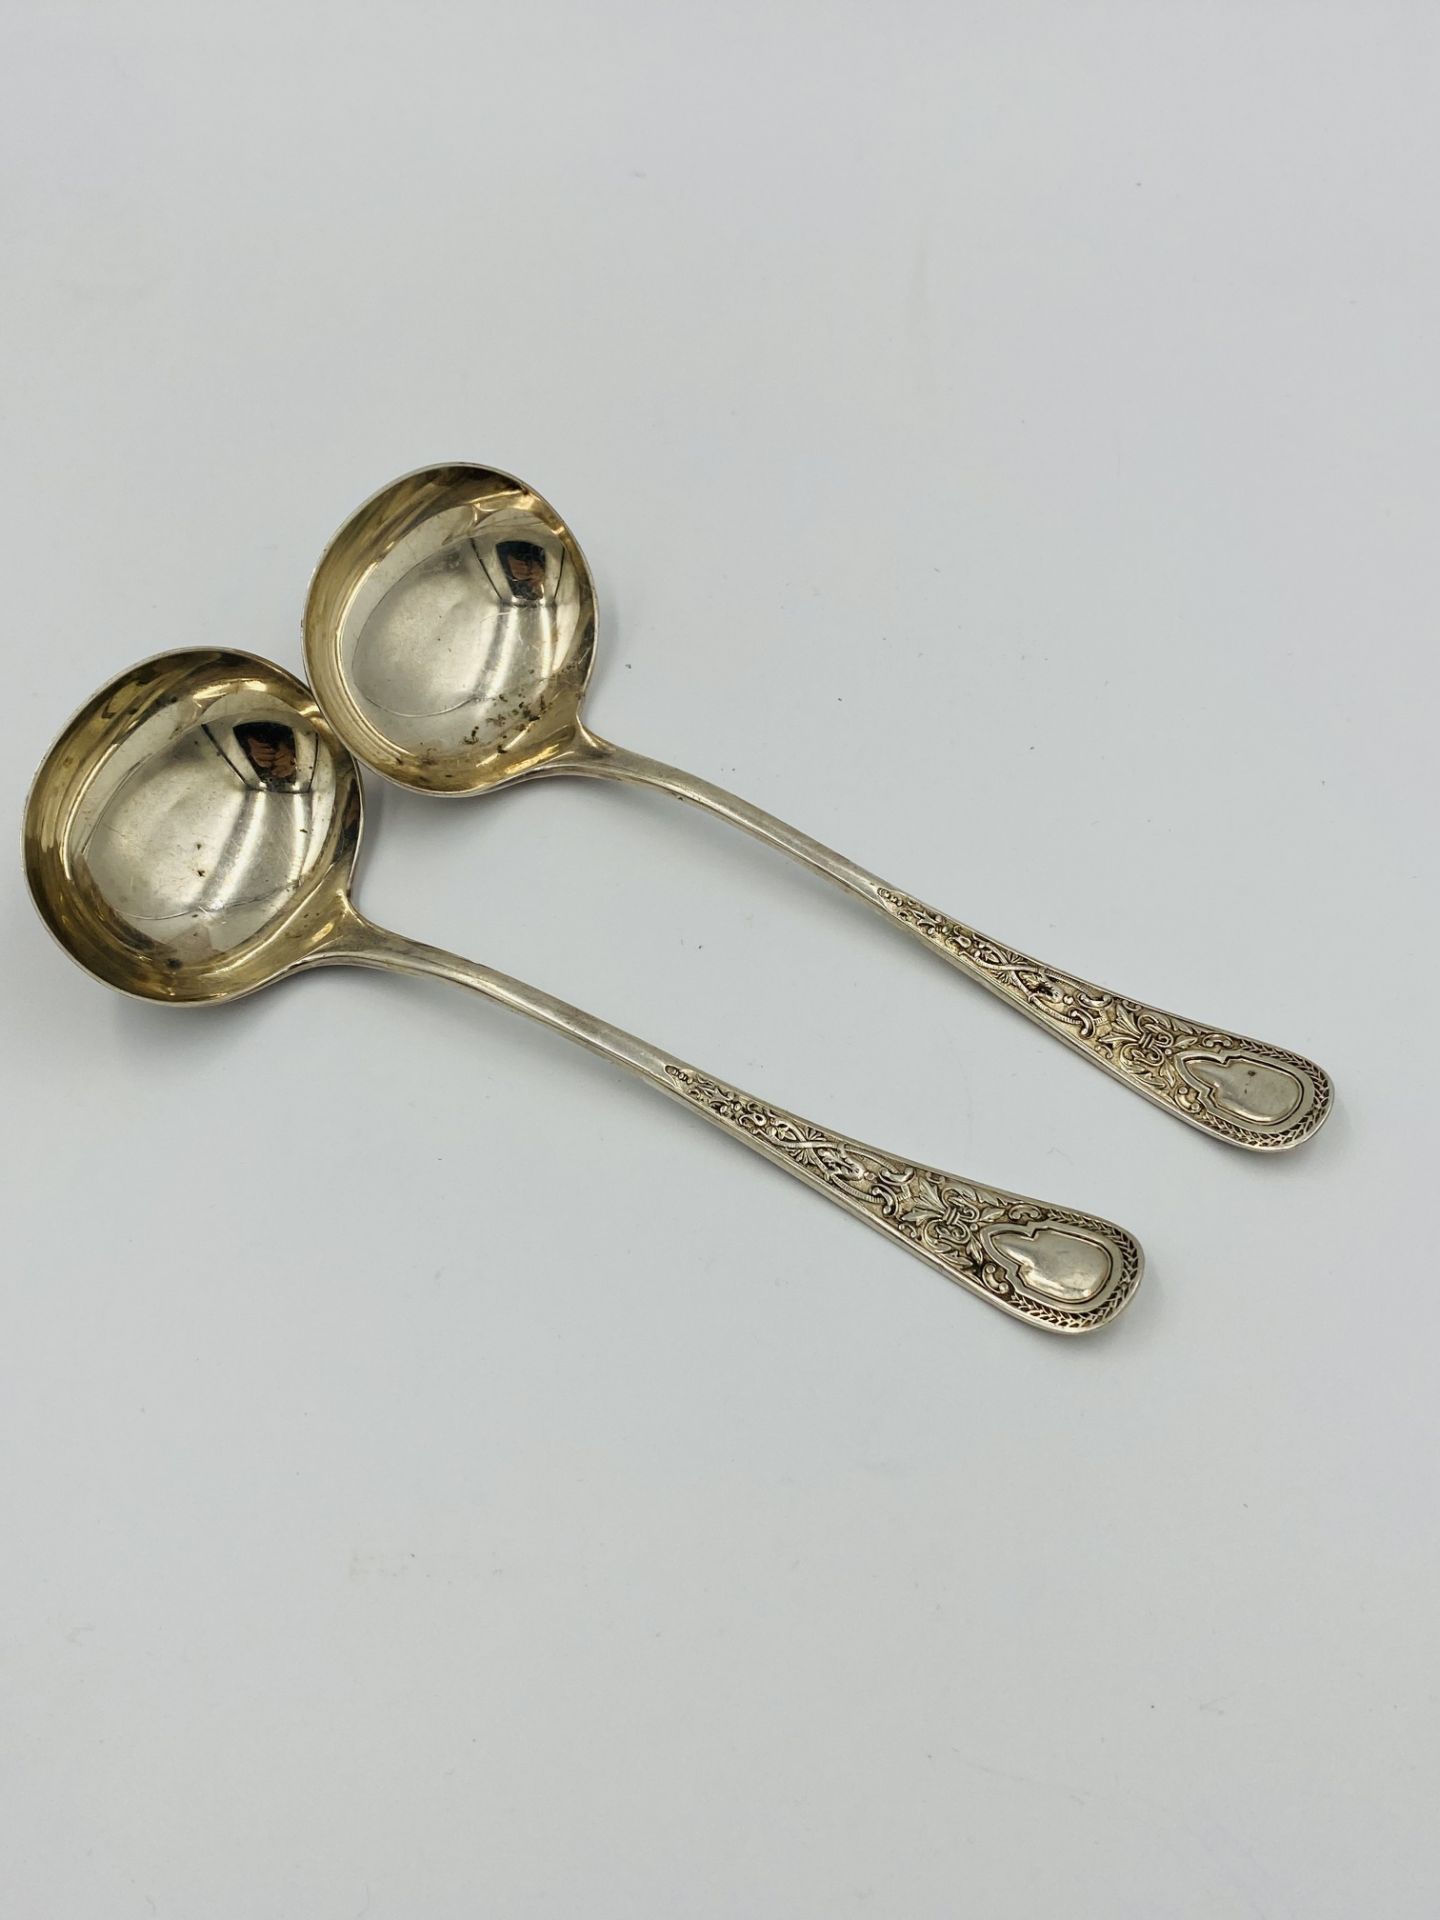 Pair of silver sauce ladles - Image 2 of 4